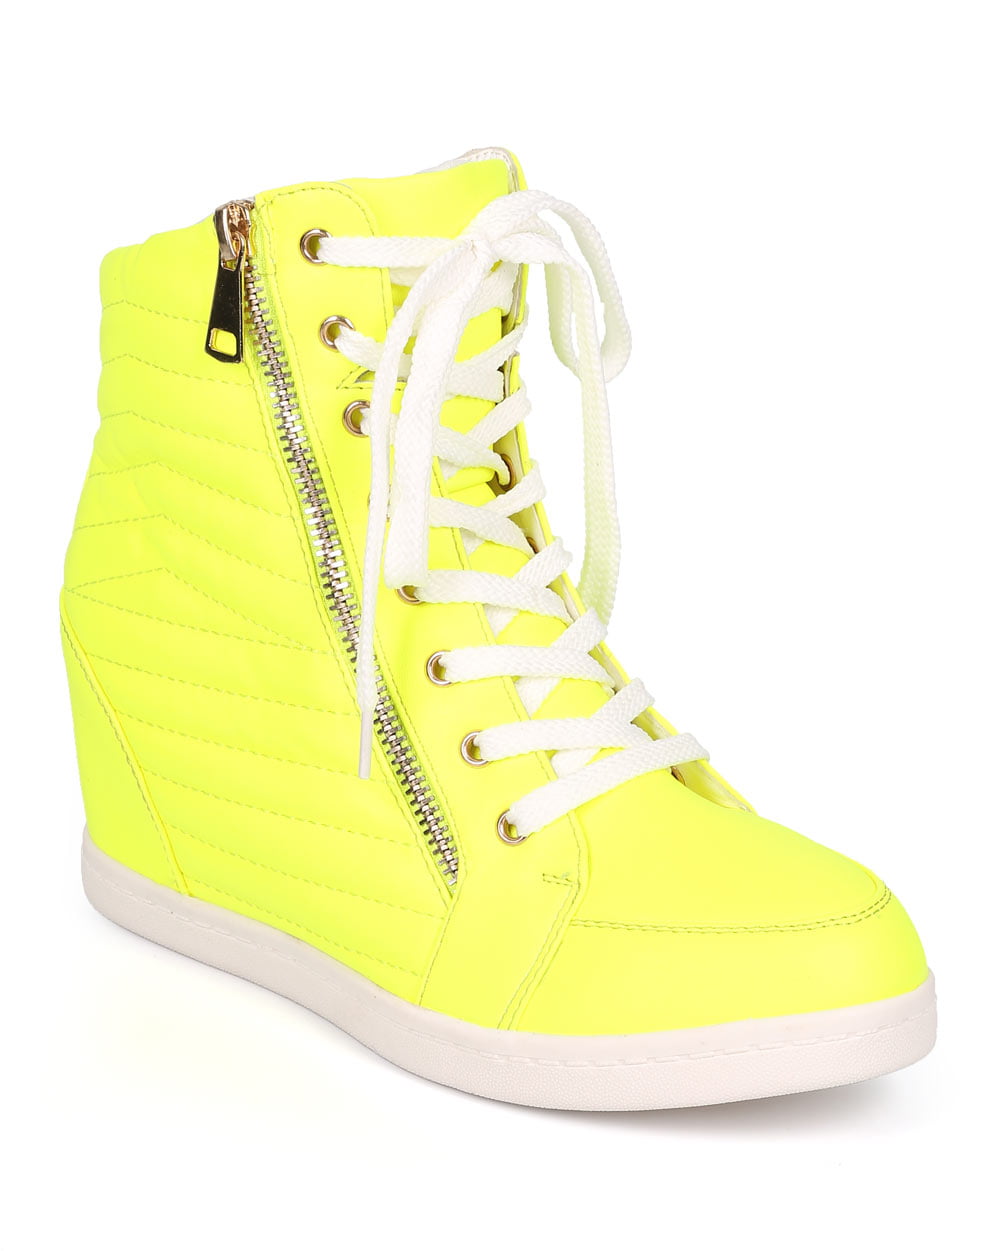 New Girl Link Peggy-61K Leatherette Round Toe High Top Wedge Sneaker